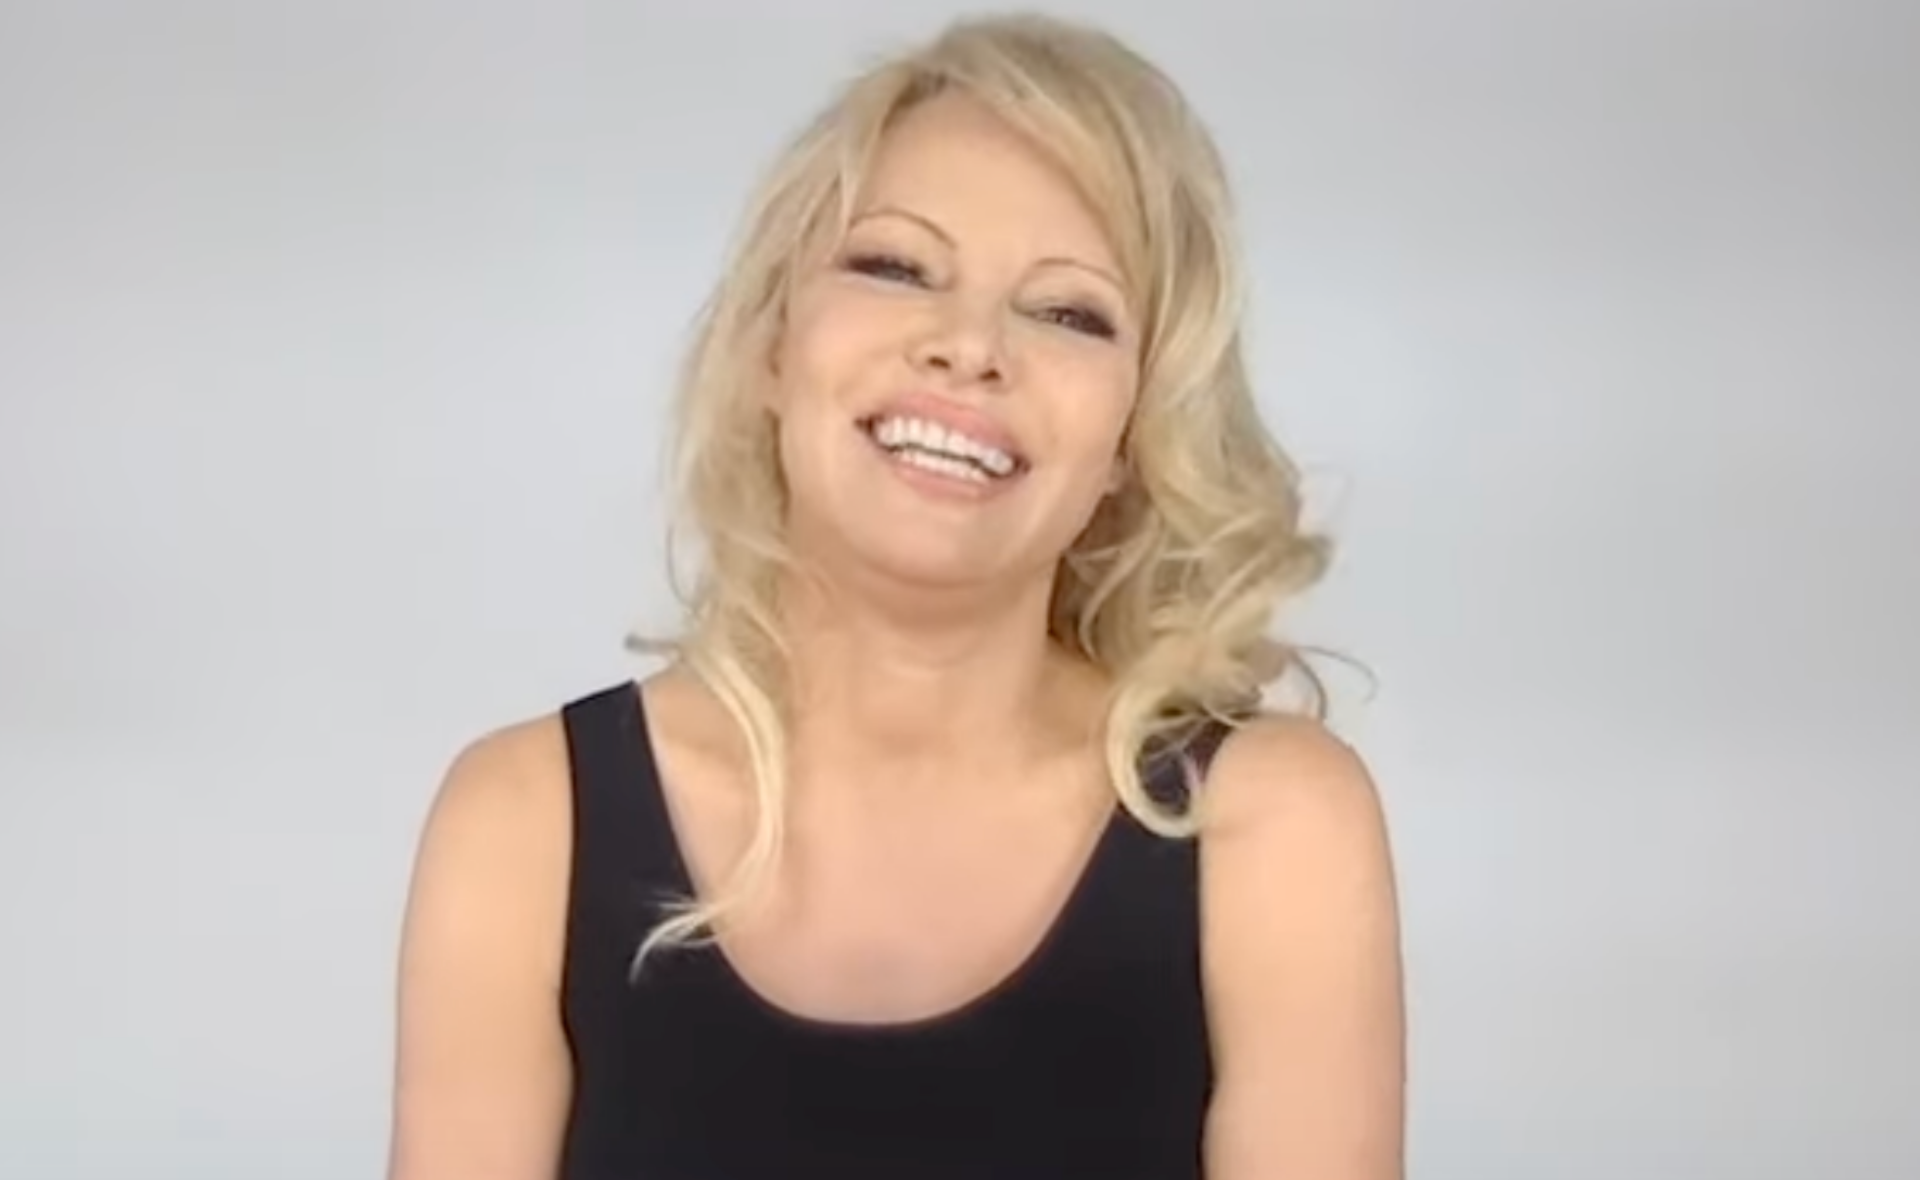 Activist, mum-of-two and bombshell: Here’s where Pamela Anderson is today